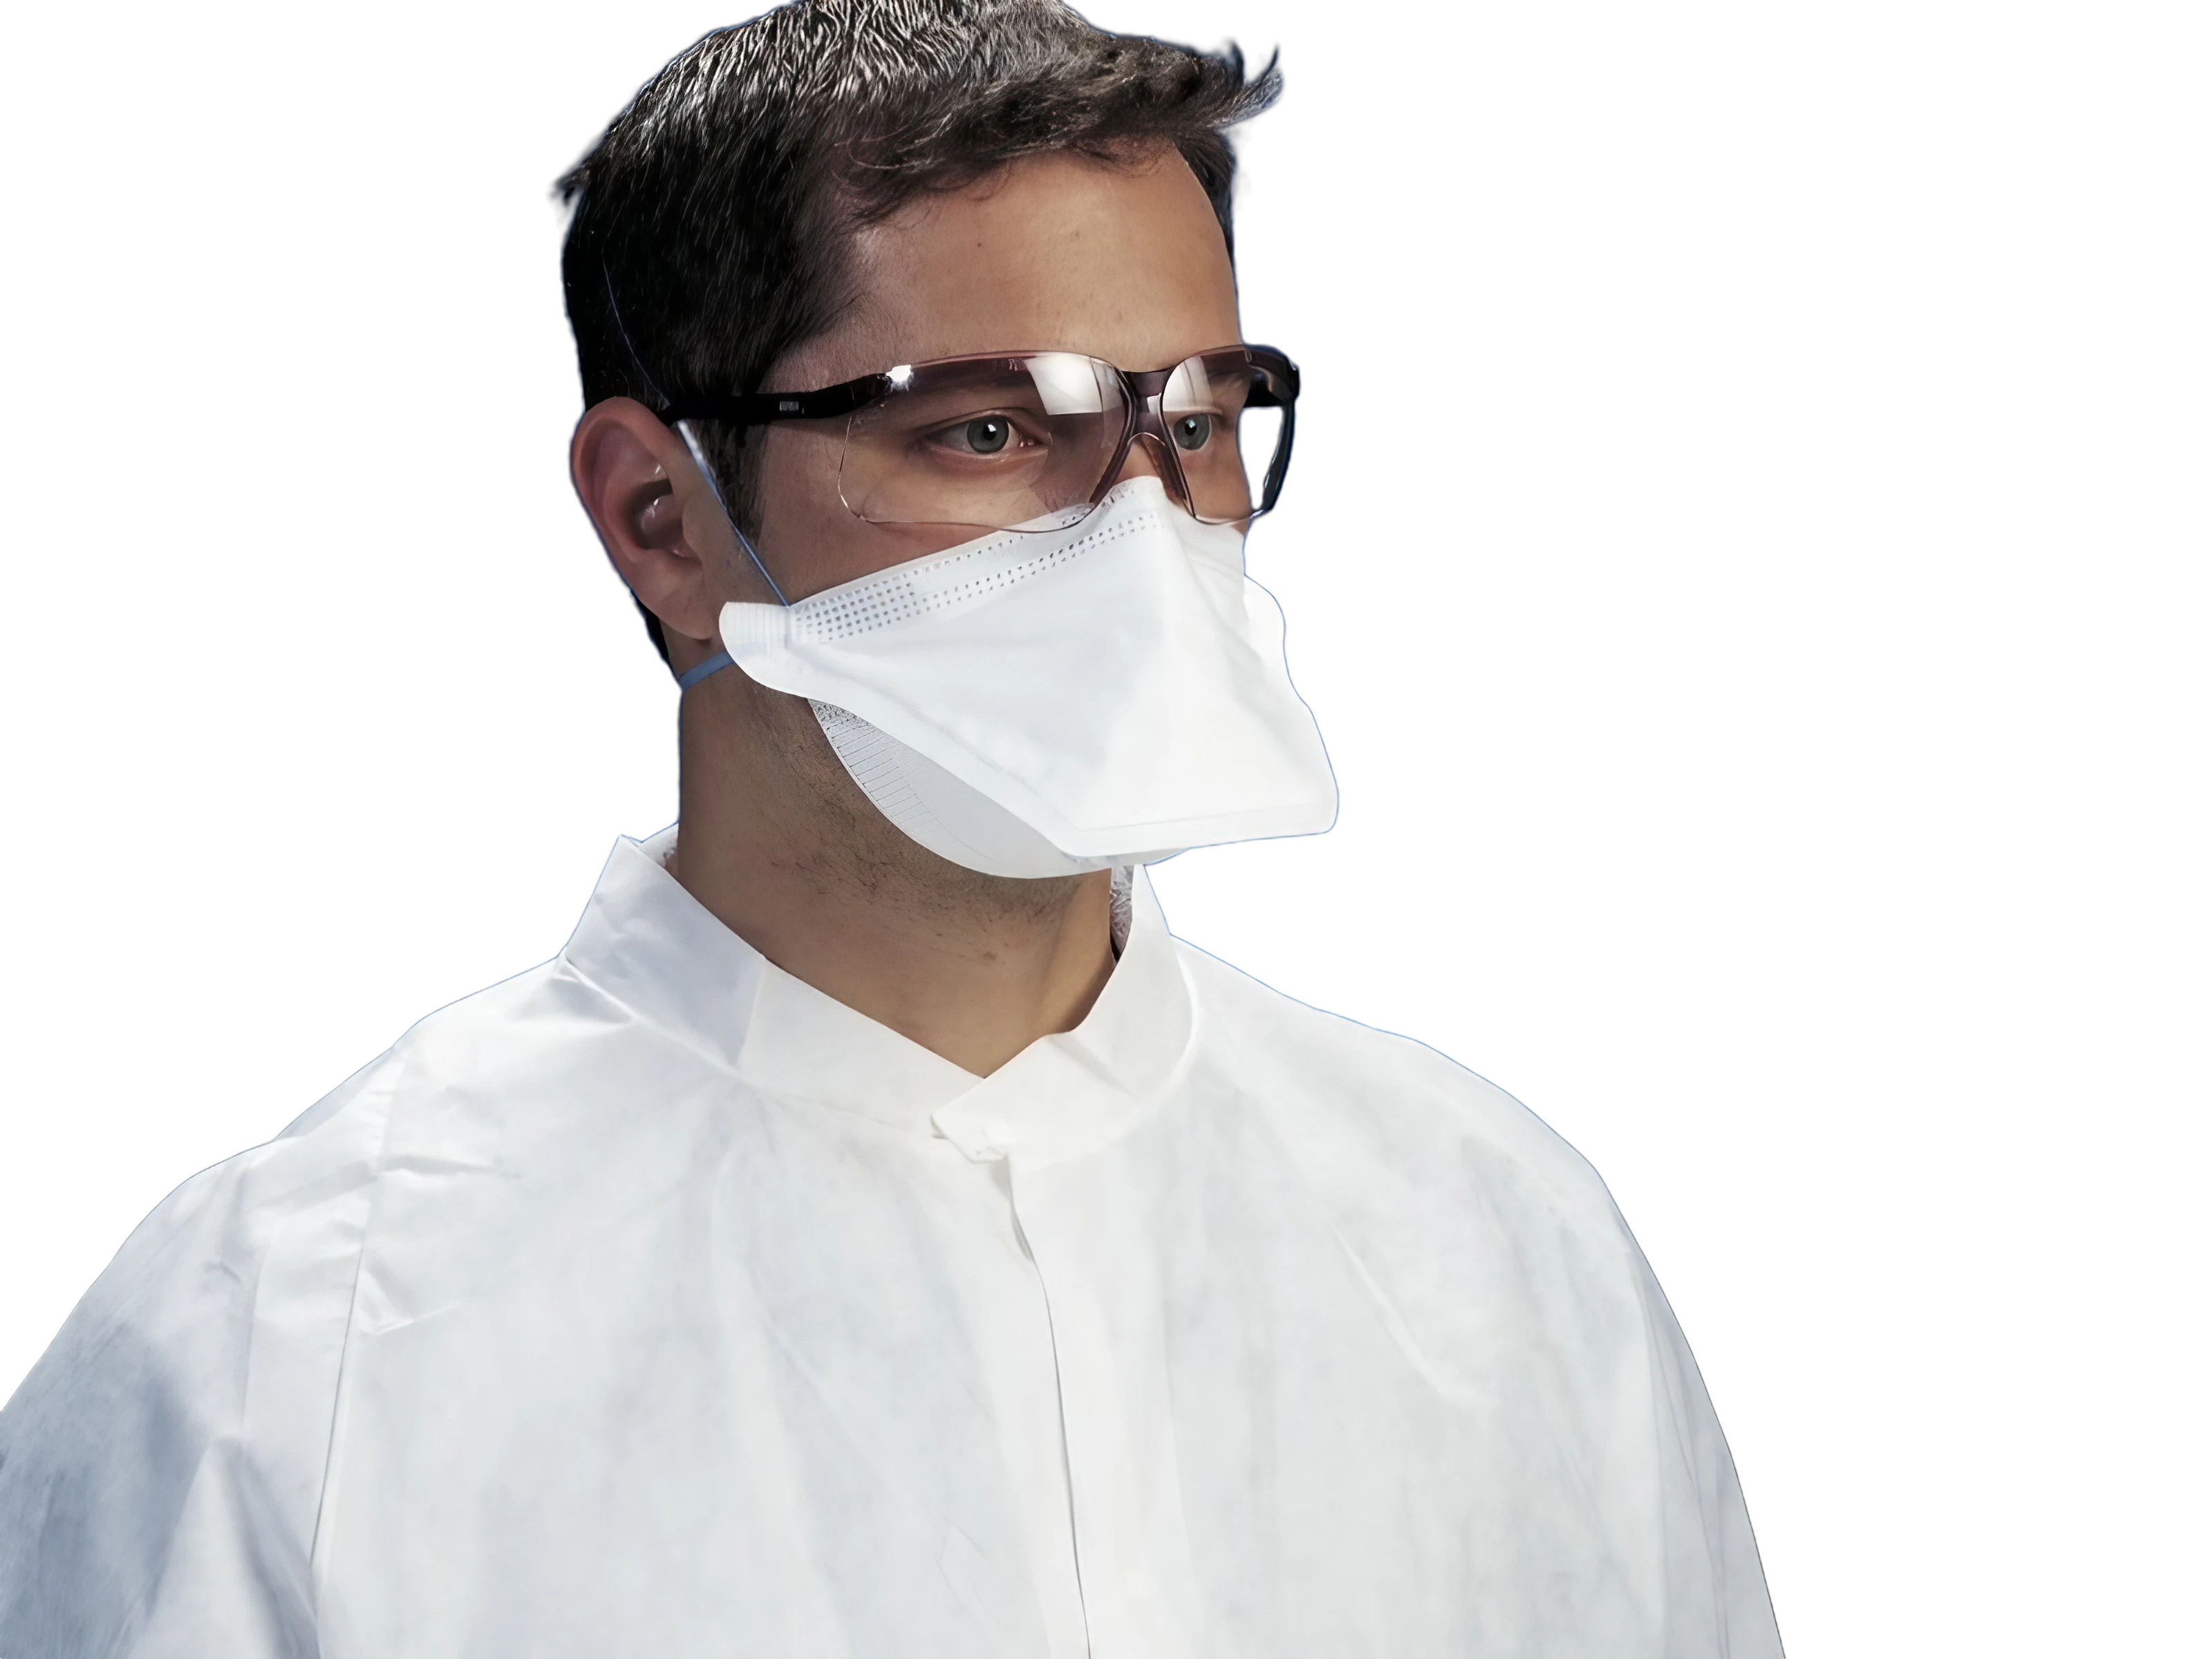 PFR95 N95 Particulate Filter Respirator & Surgical Mask